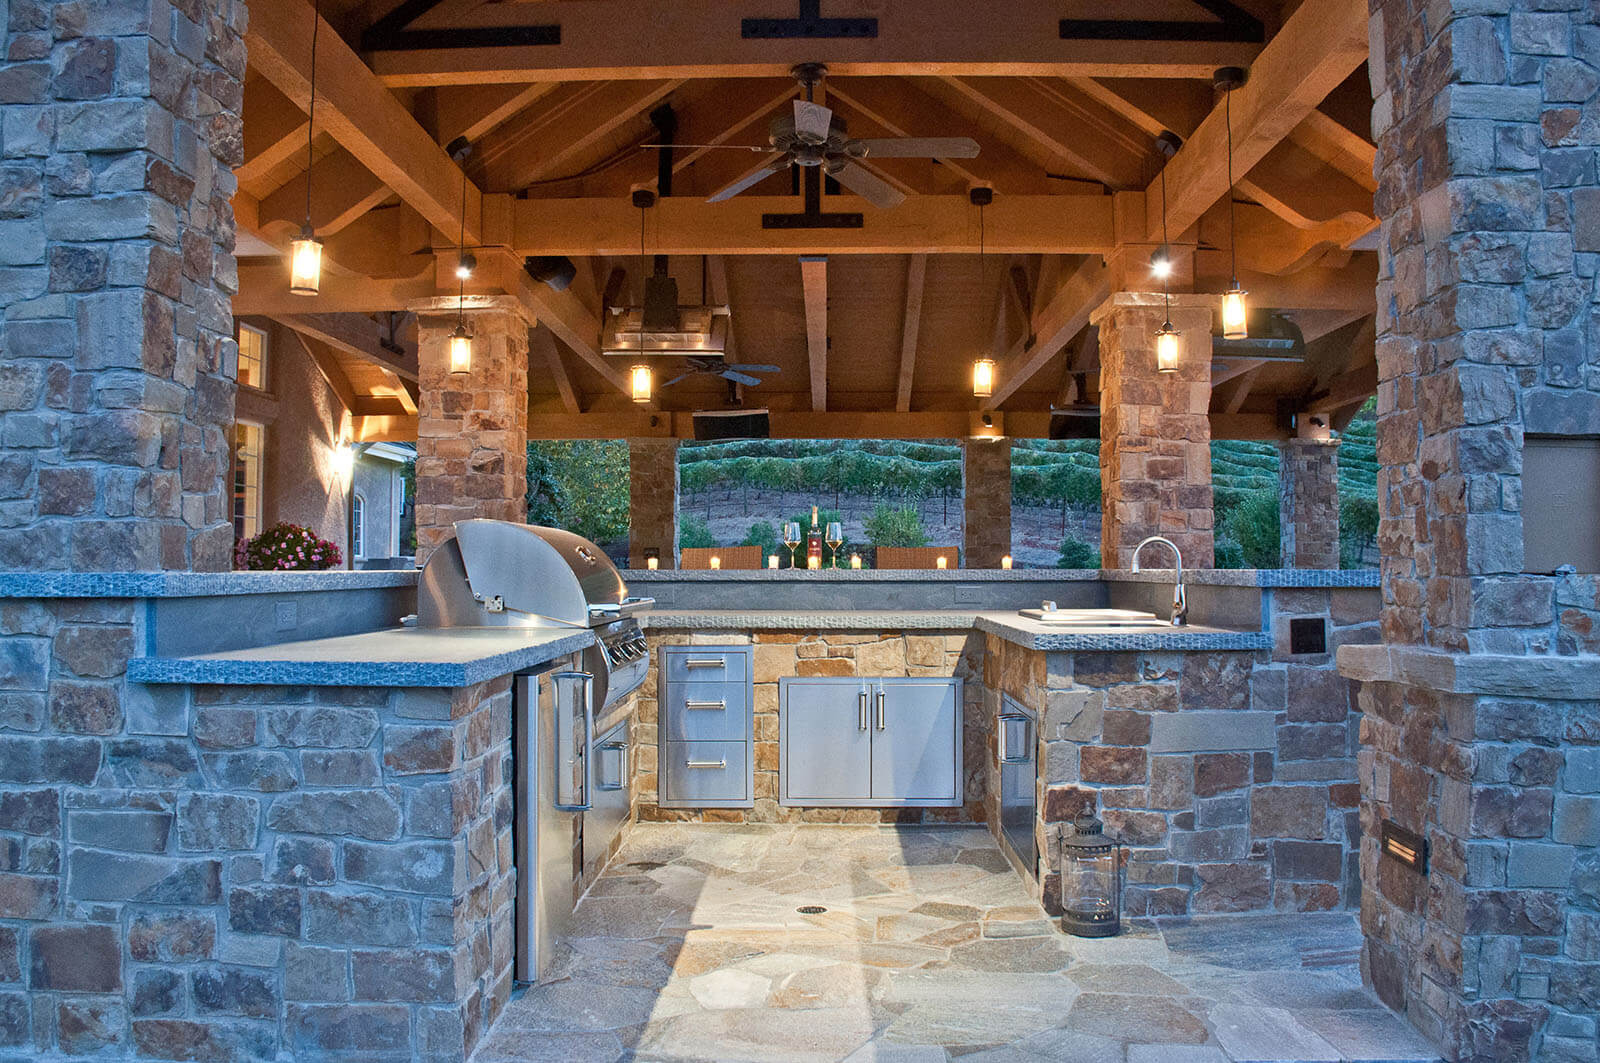 Sonoma-style outdoor bar and grill under wood pavilion with stone accents and romantic lighting, vineyard beyond